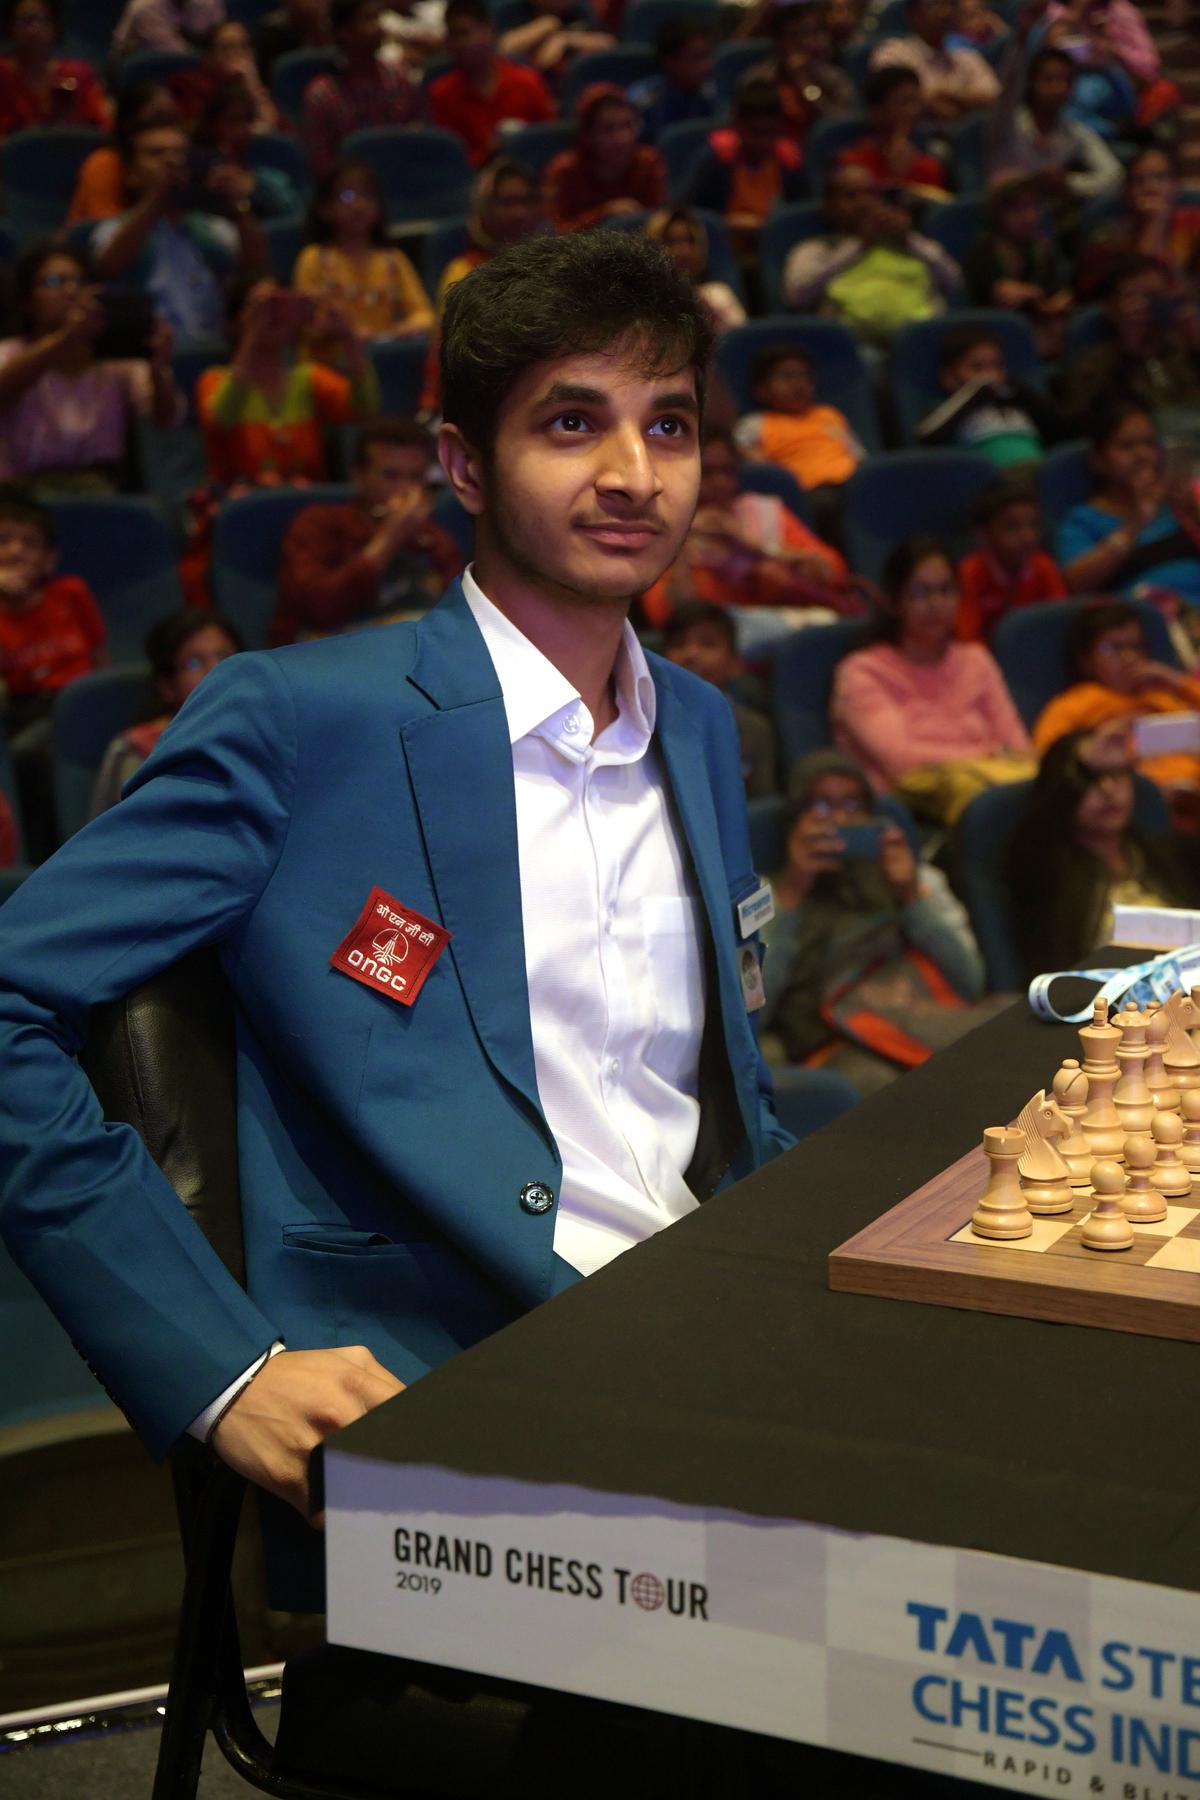 The aim is to cross the 2700 ELO rating: Narayanan